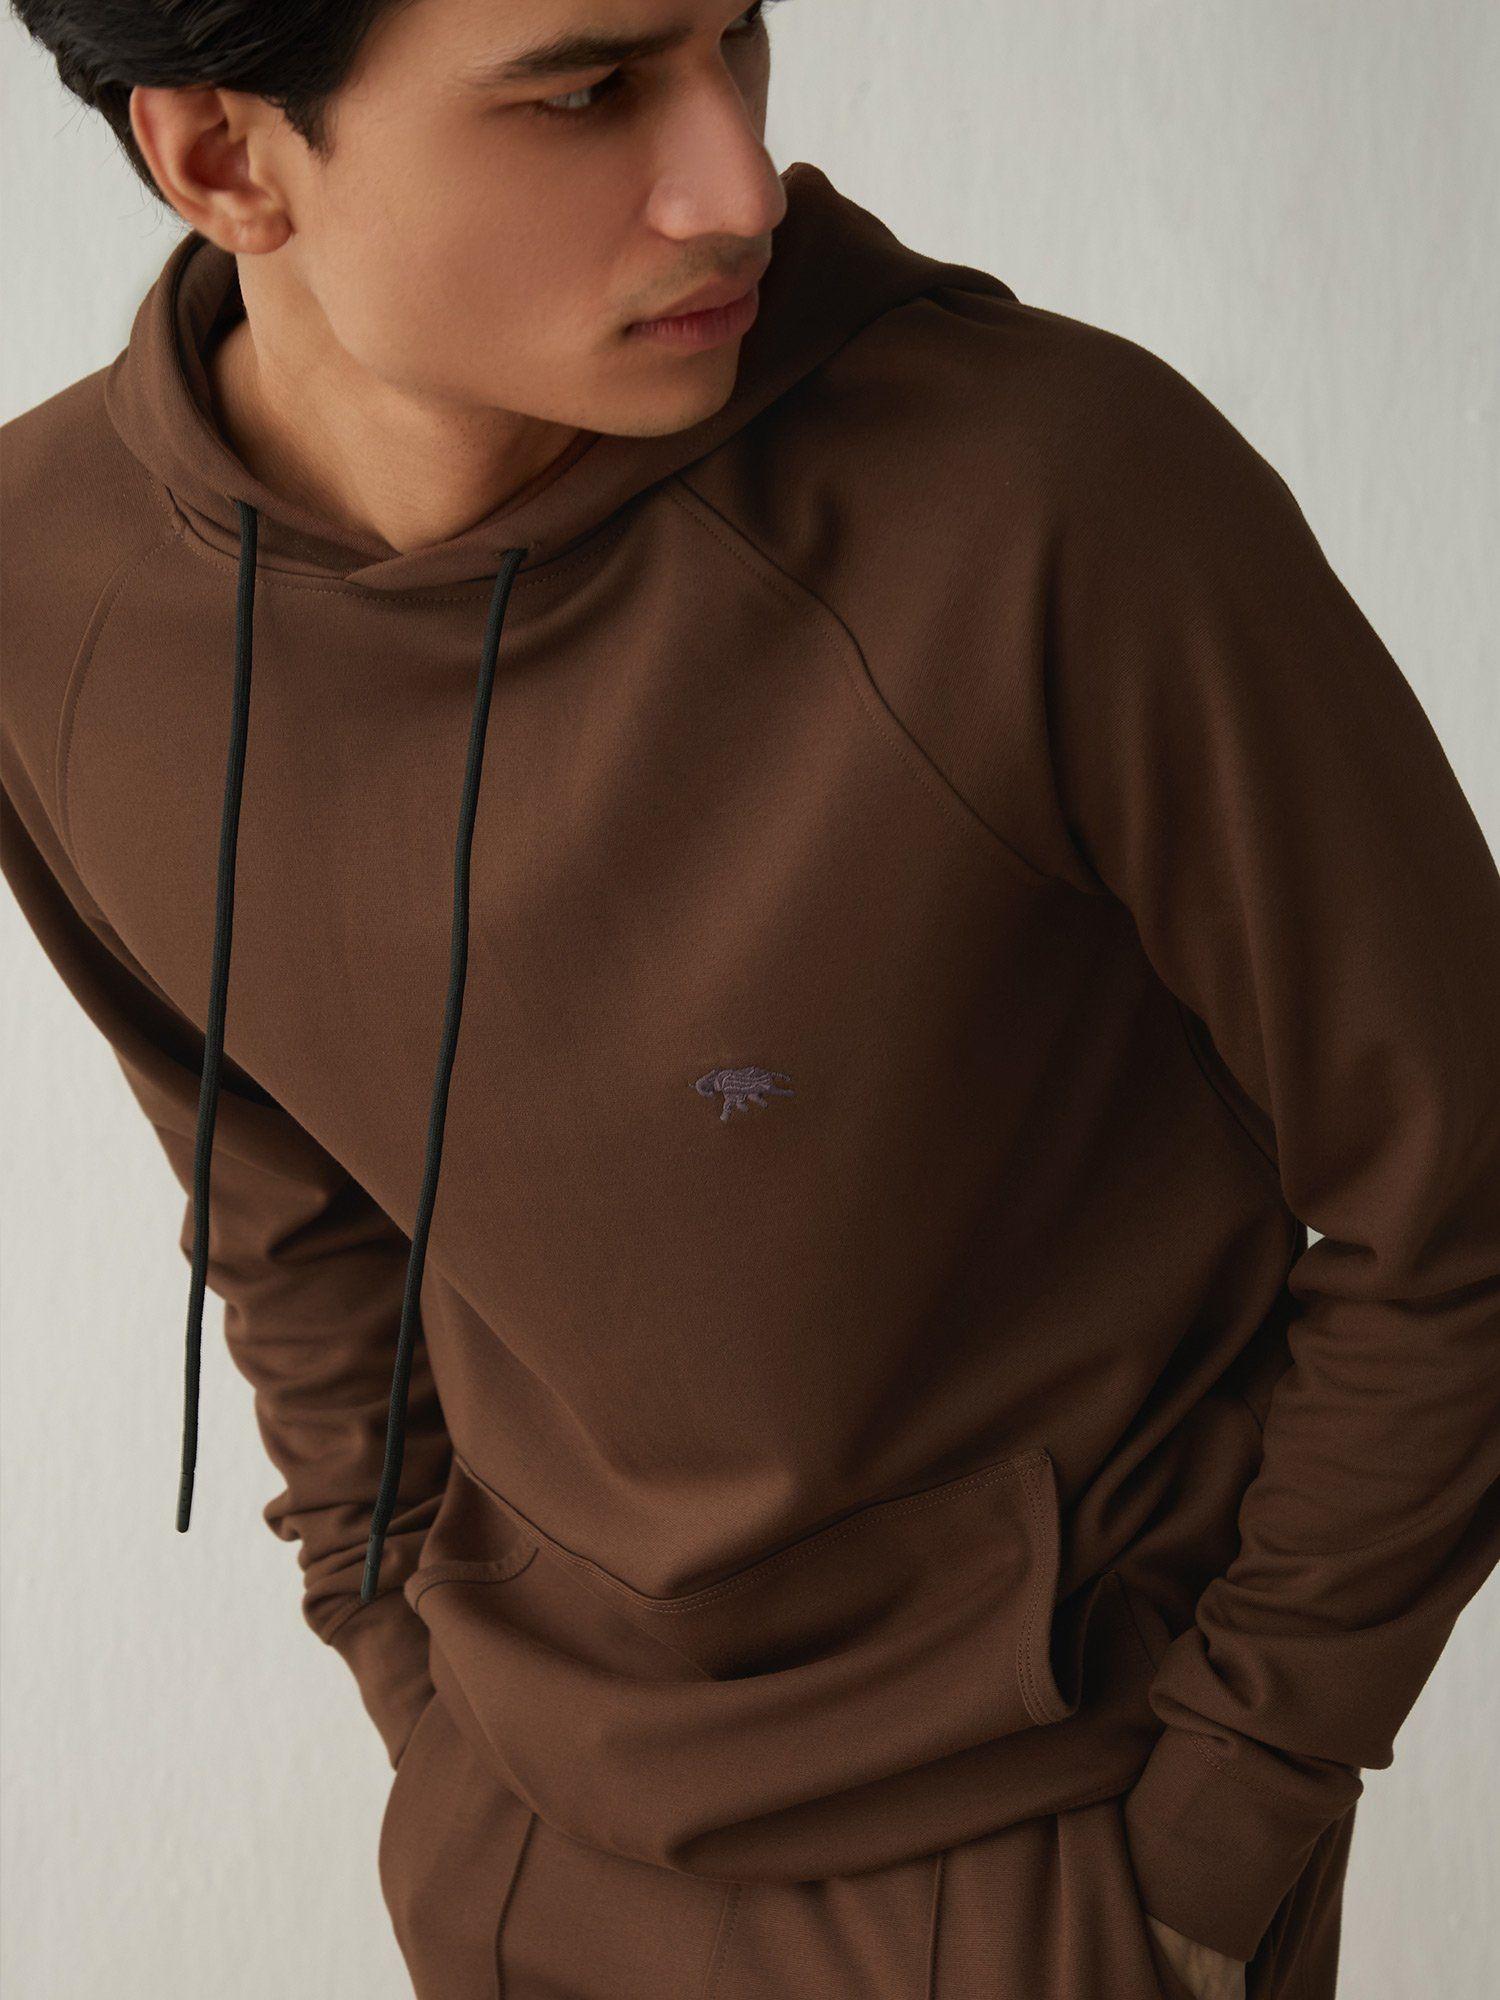 cocoa brown hoodie